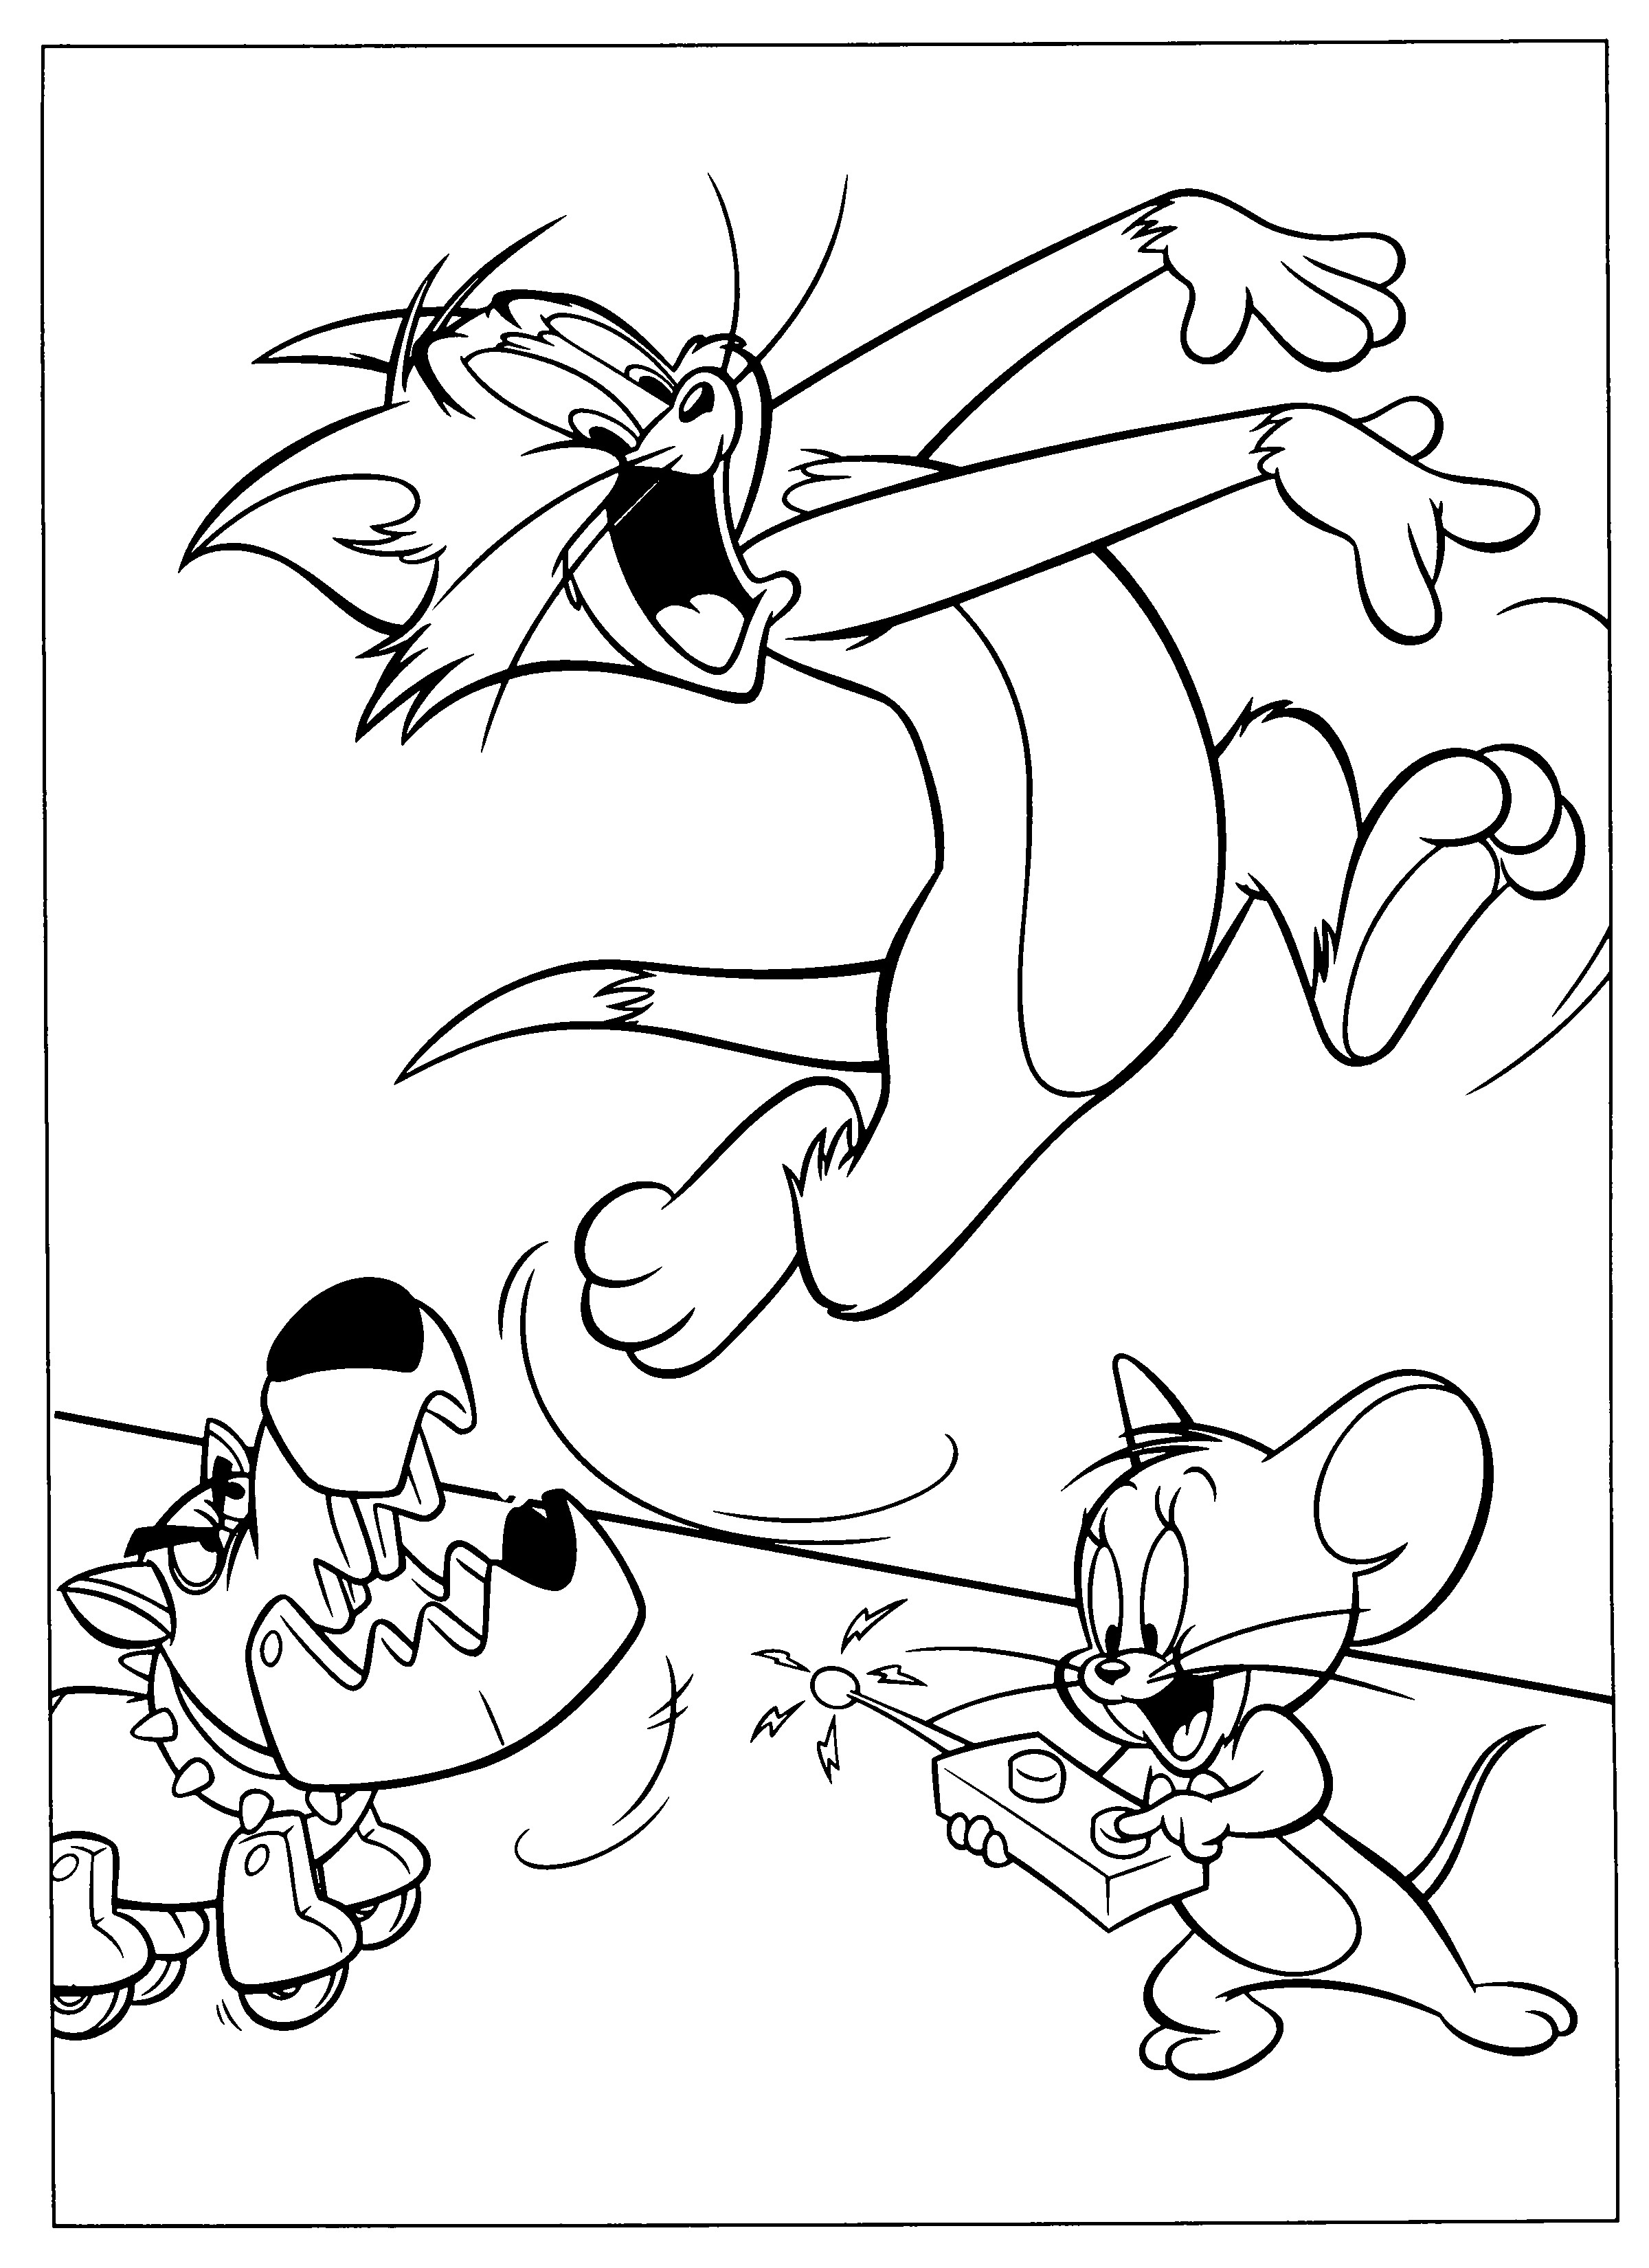 Free Printable Cartoon Coloring Pages
 Free Printable Tom And Jerry Coloring Pages For Kids